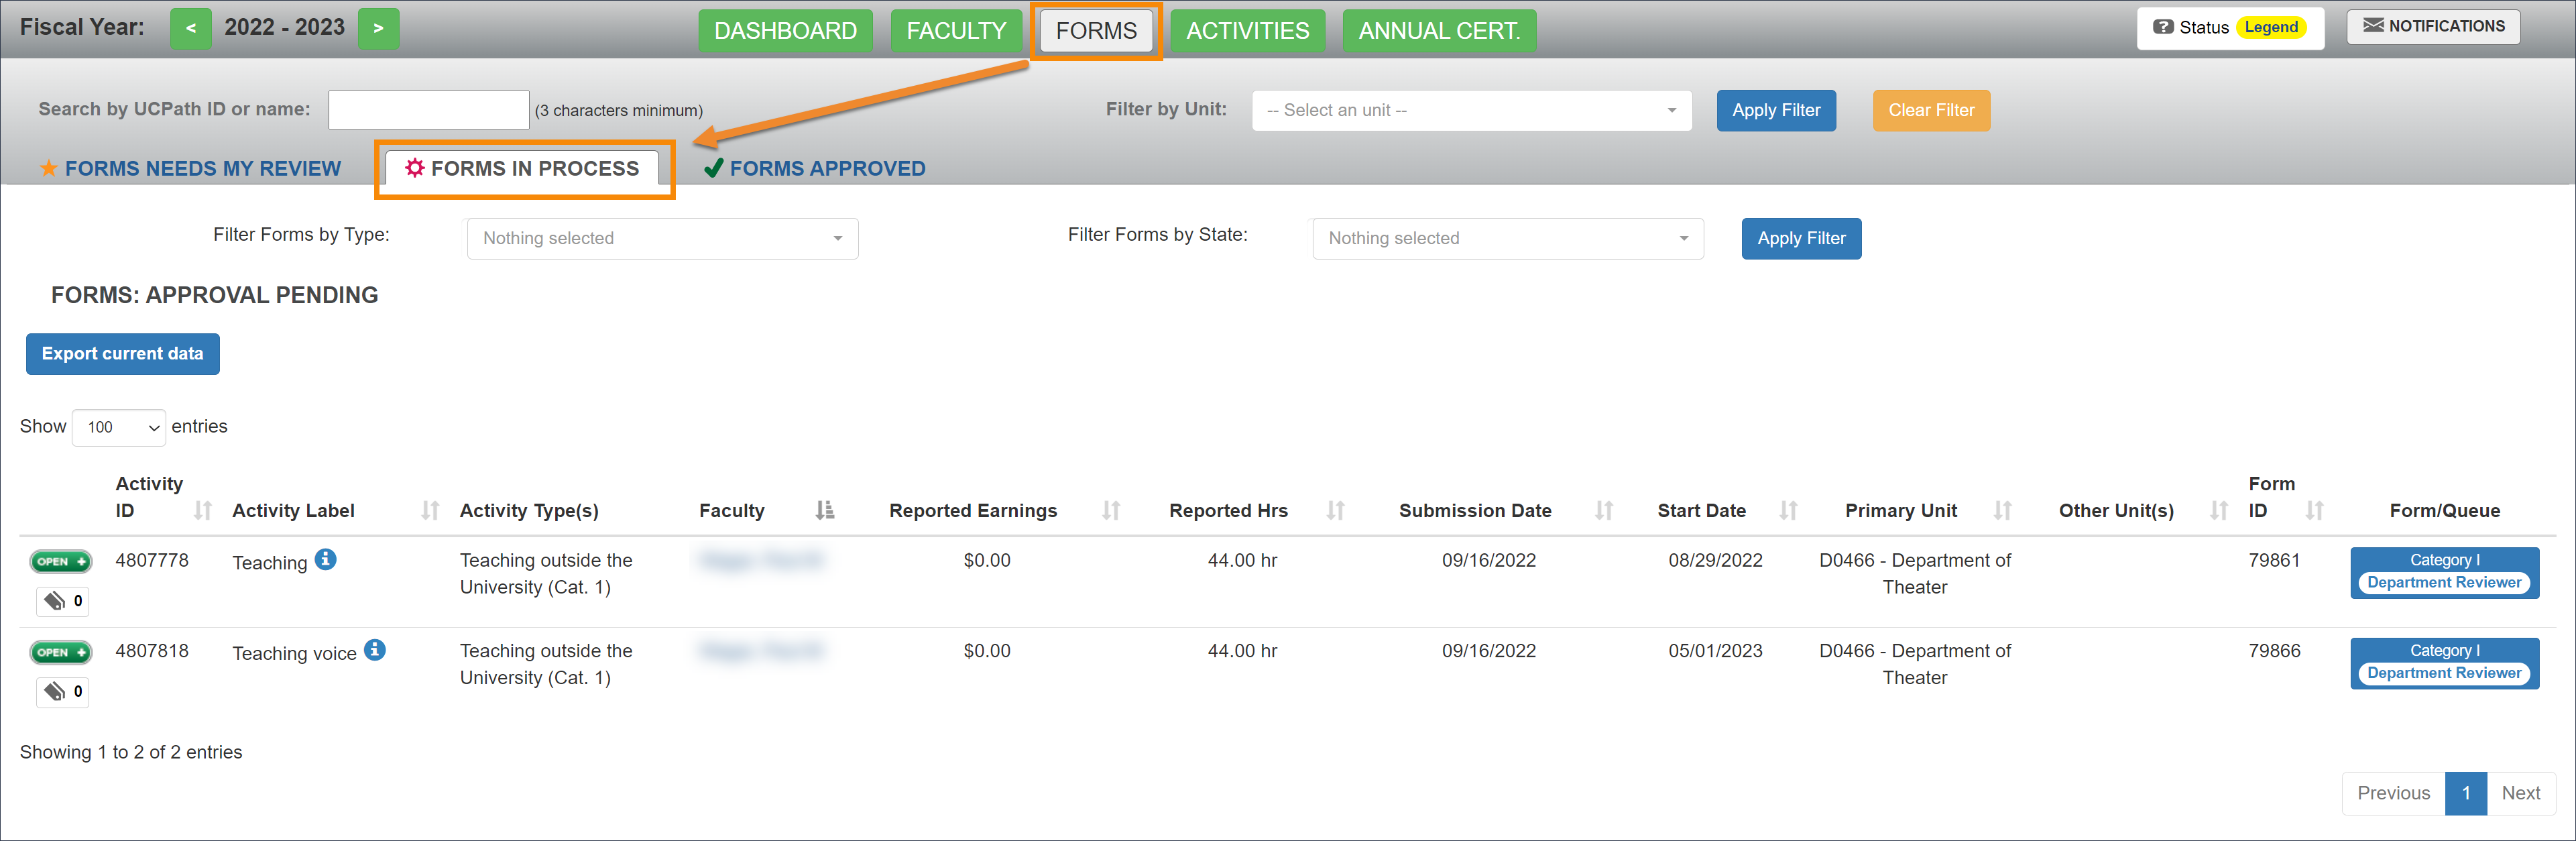 Forms In Process tab that shows all prior approval forms that have not yet received final approval/acknowledgment